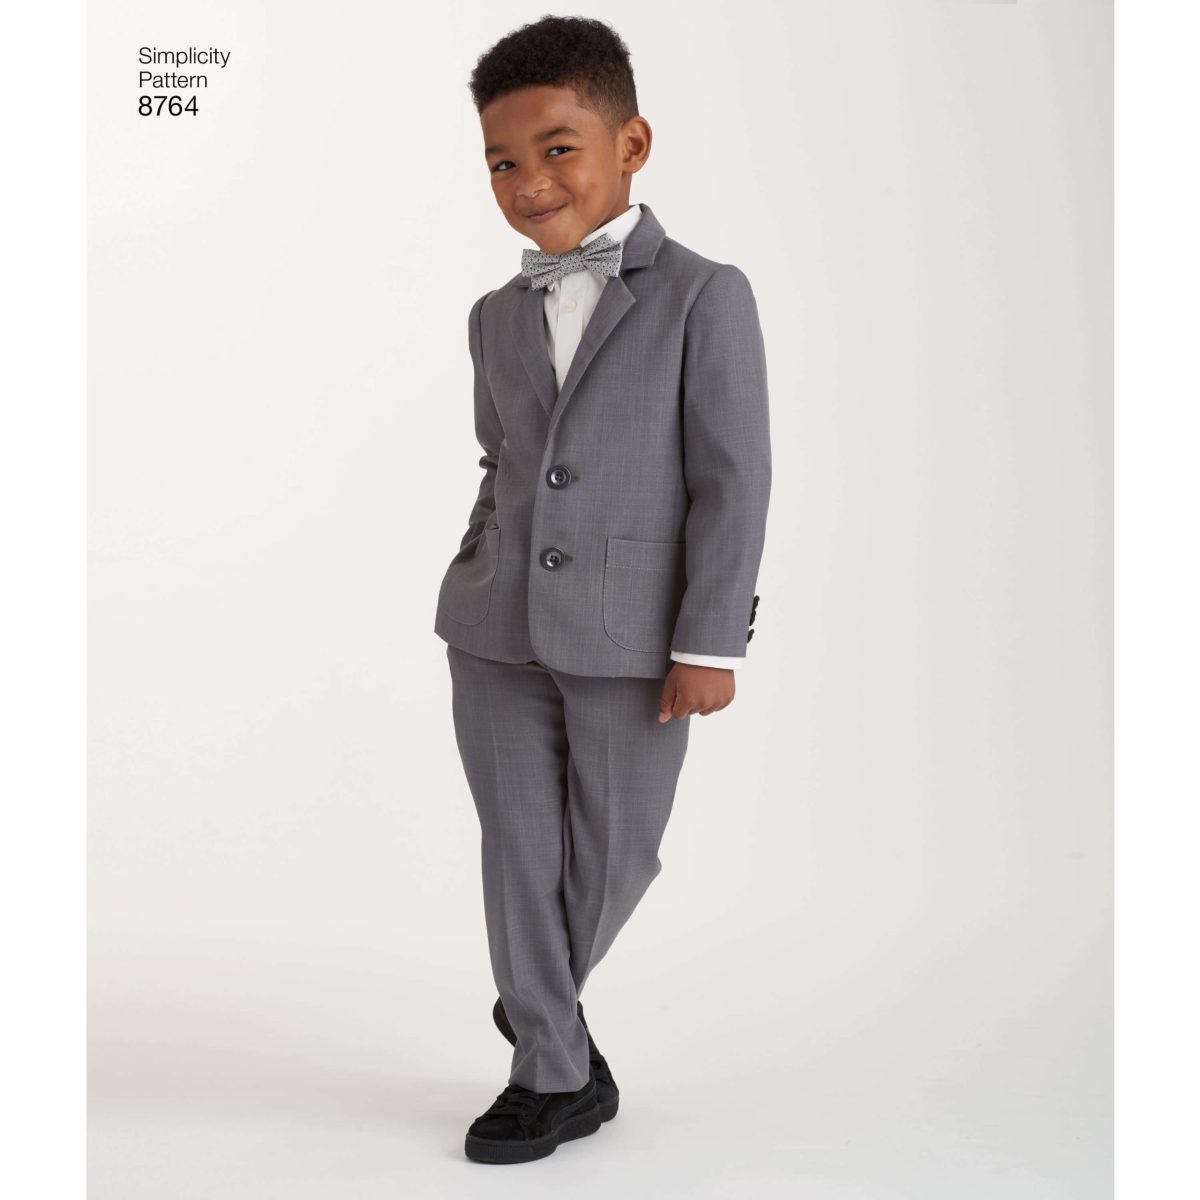 Simplicity Sewing Pattern 8764 Boys' Suit and Ties